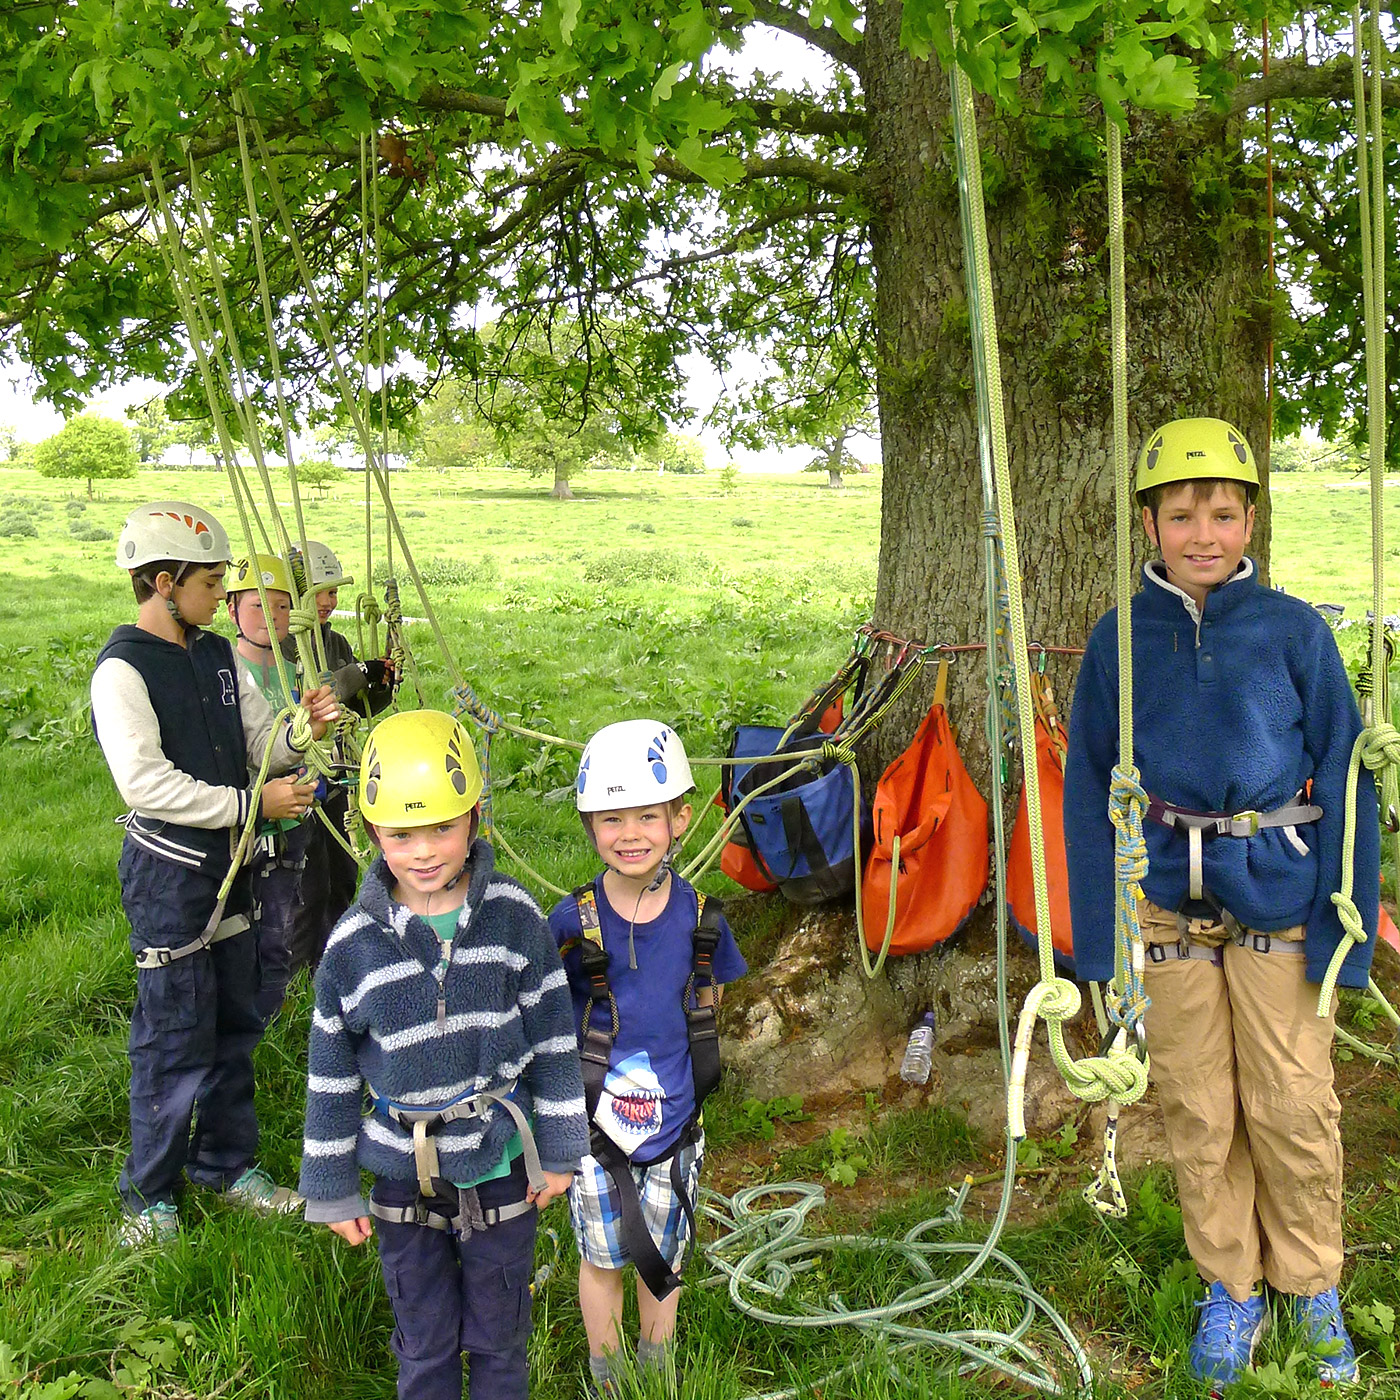 Ready, Set, Go! Great teamwork and fun climbing giant trees together